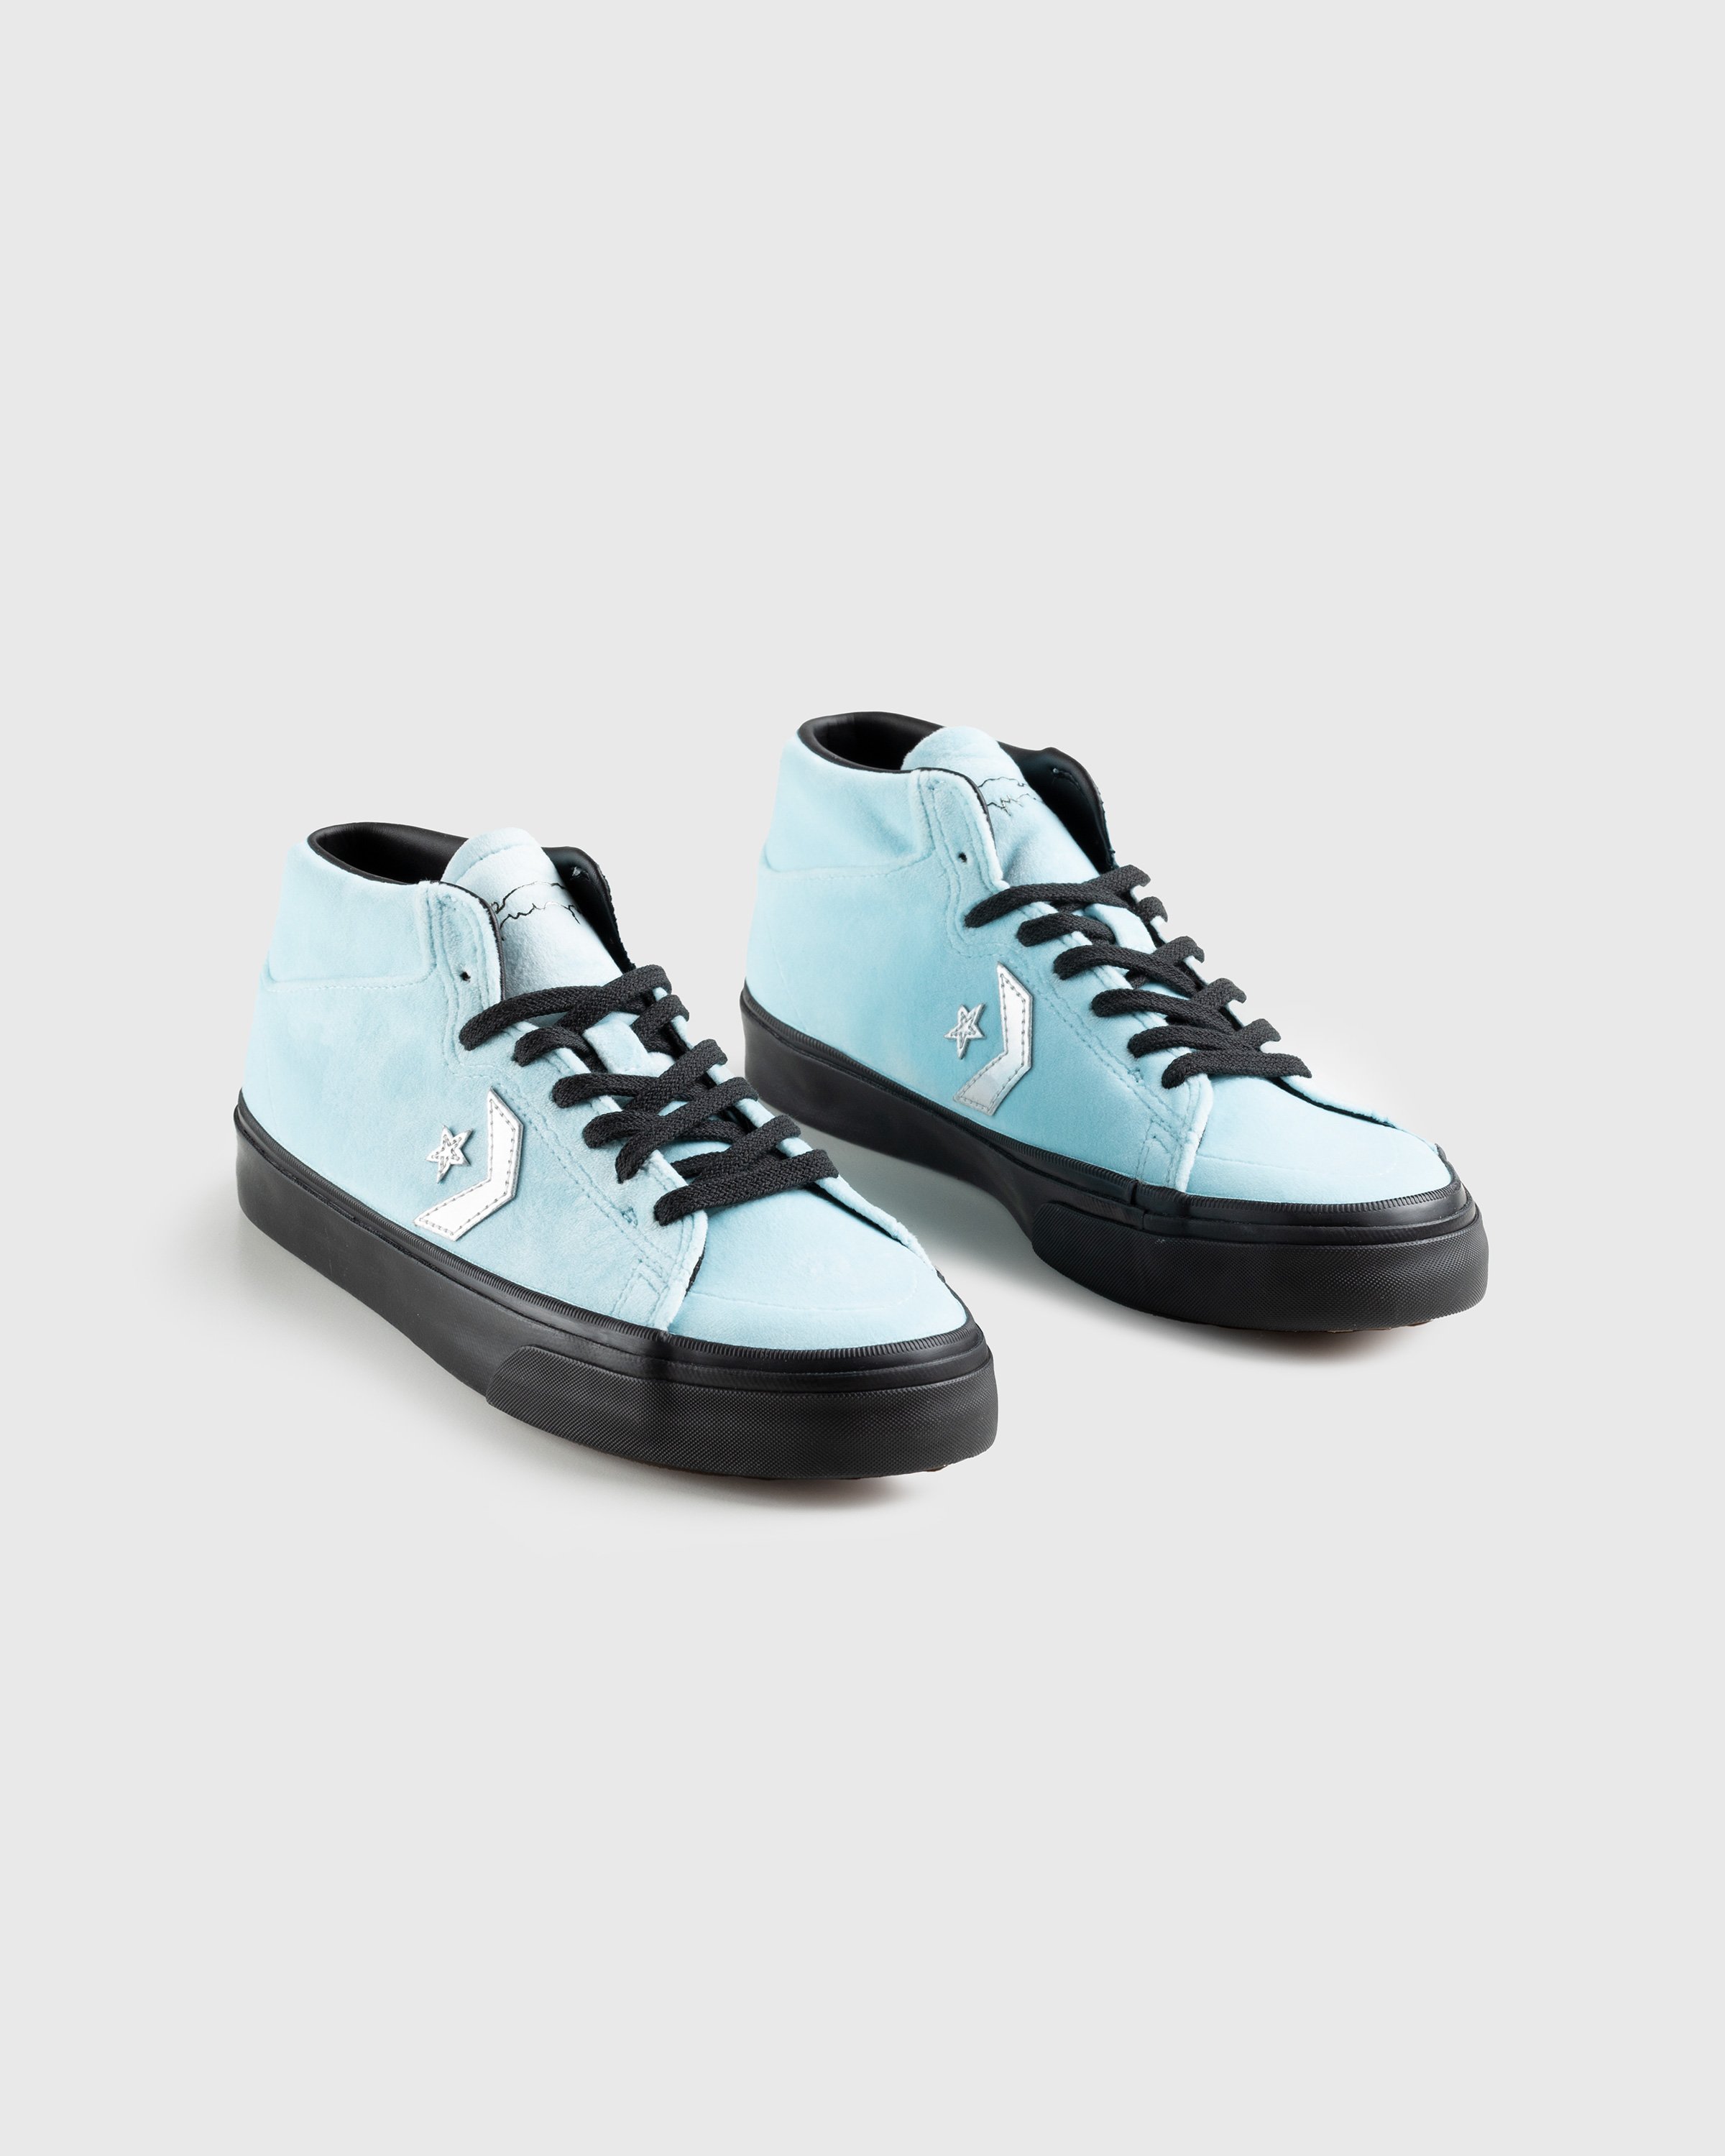 Converse x Fucking Awesome - Louie Lopez Pro Mid Cyan Tint/Black - Footwear - Blue - Image 3